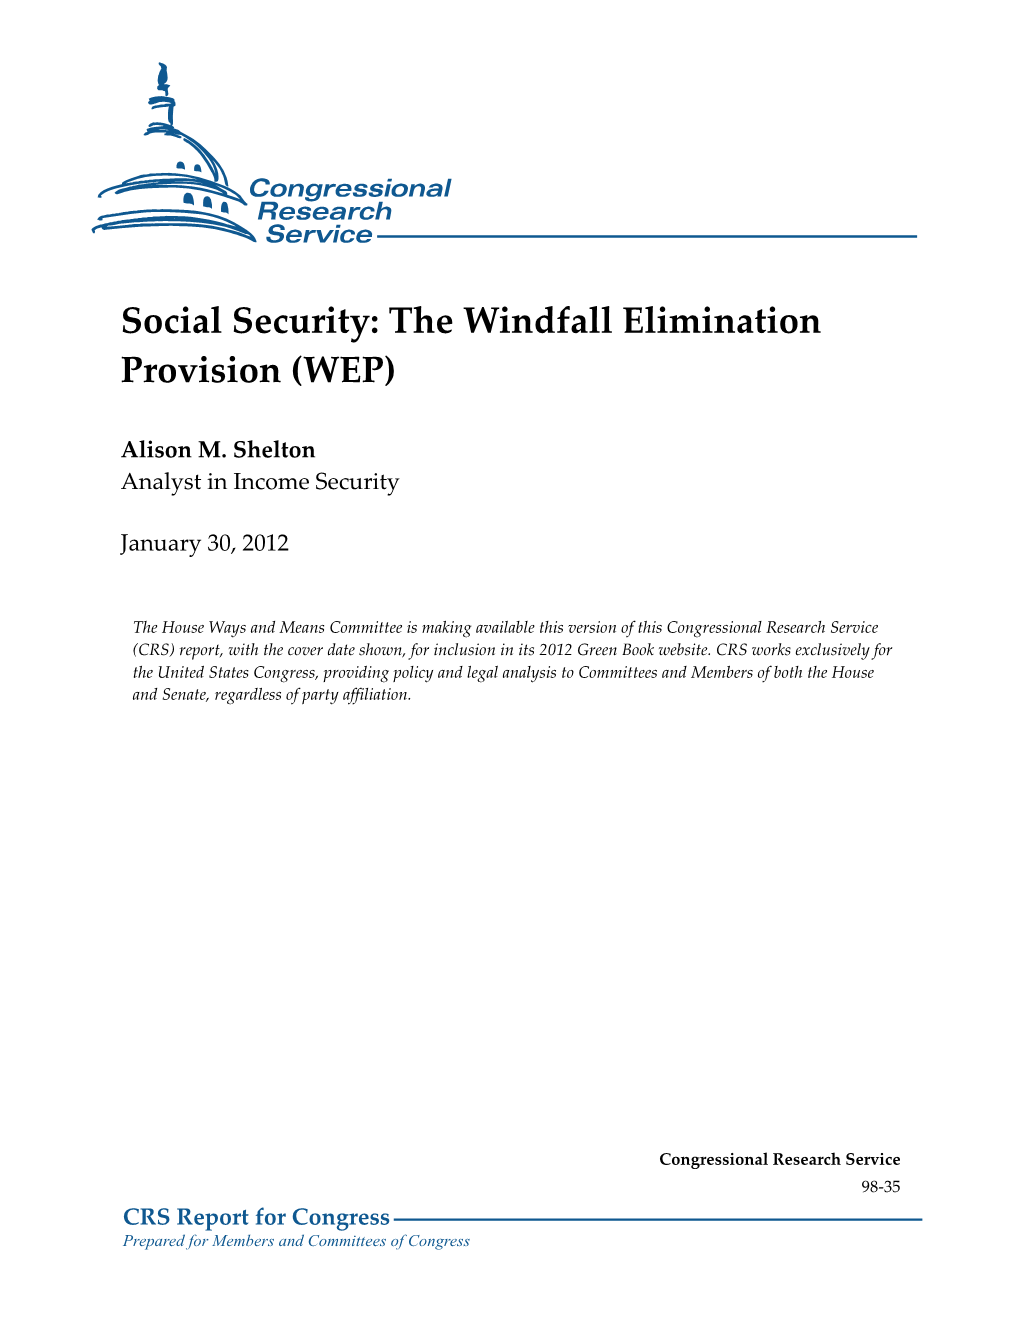 Social Security: the Windfall Elimination Provision (WEP)